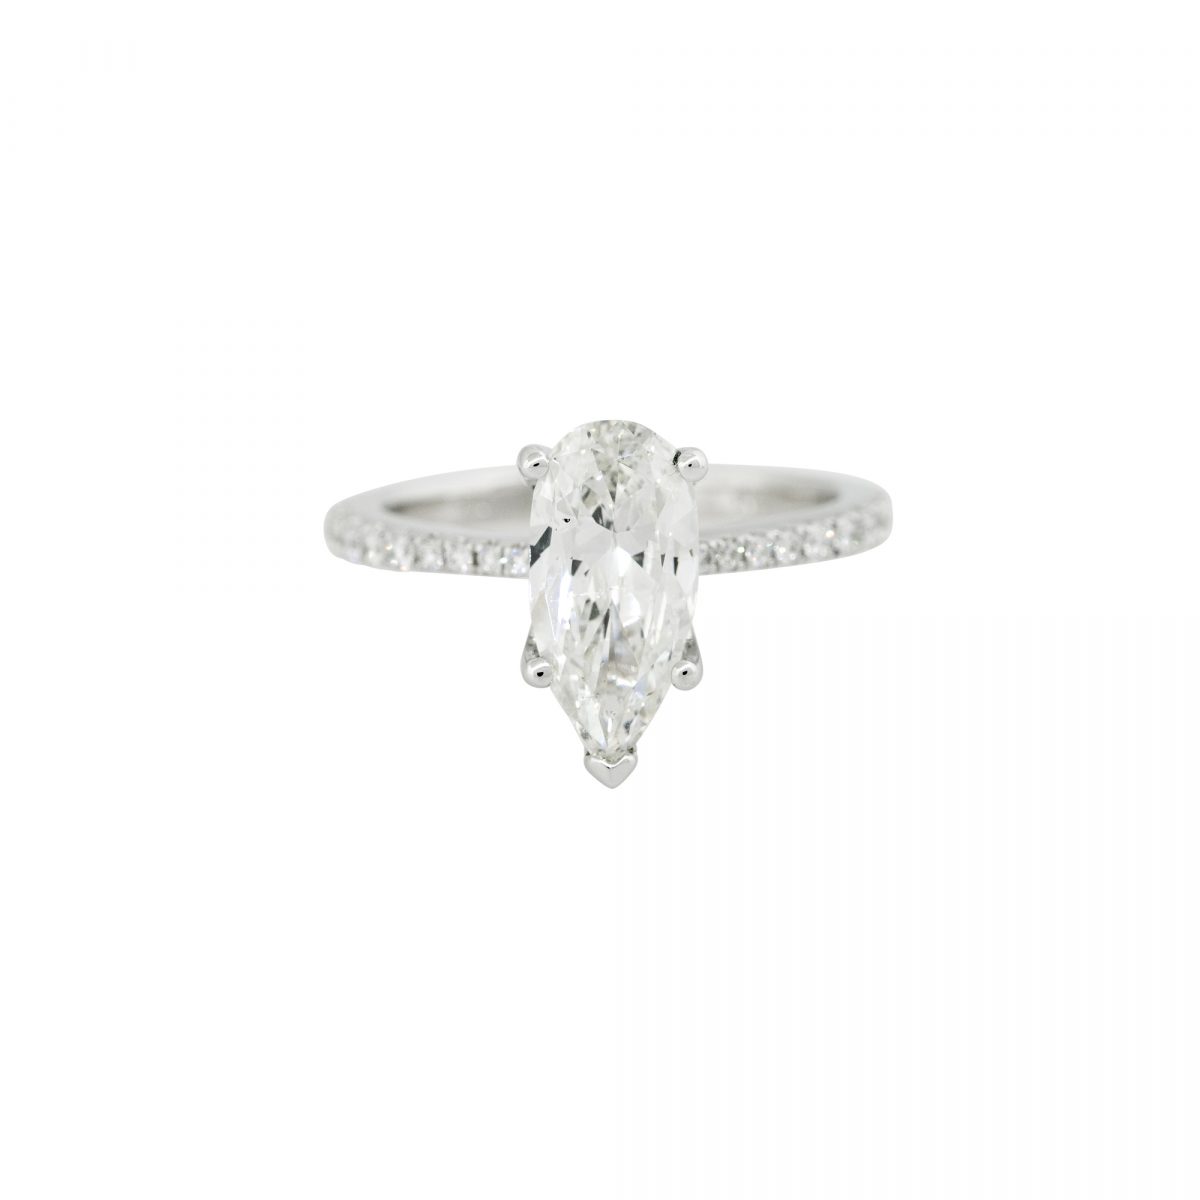 GIA Certified 18k White Gold 2.16ctw Pear Shaped Diamond Engagement Ring